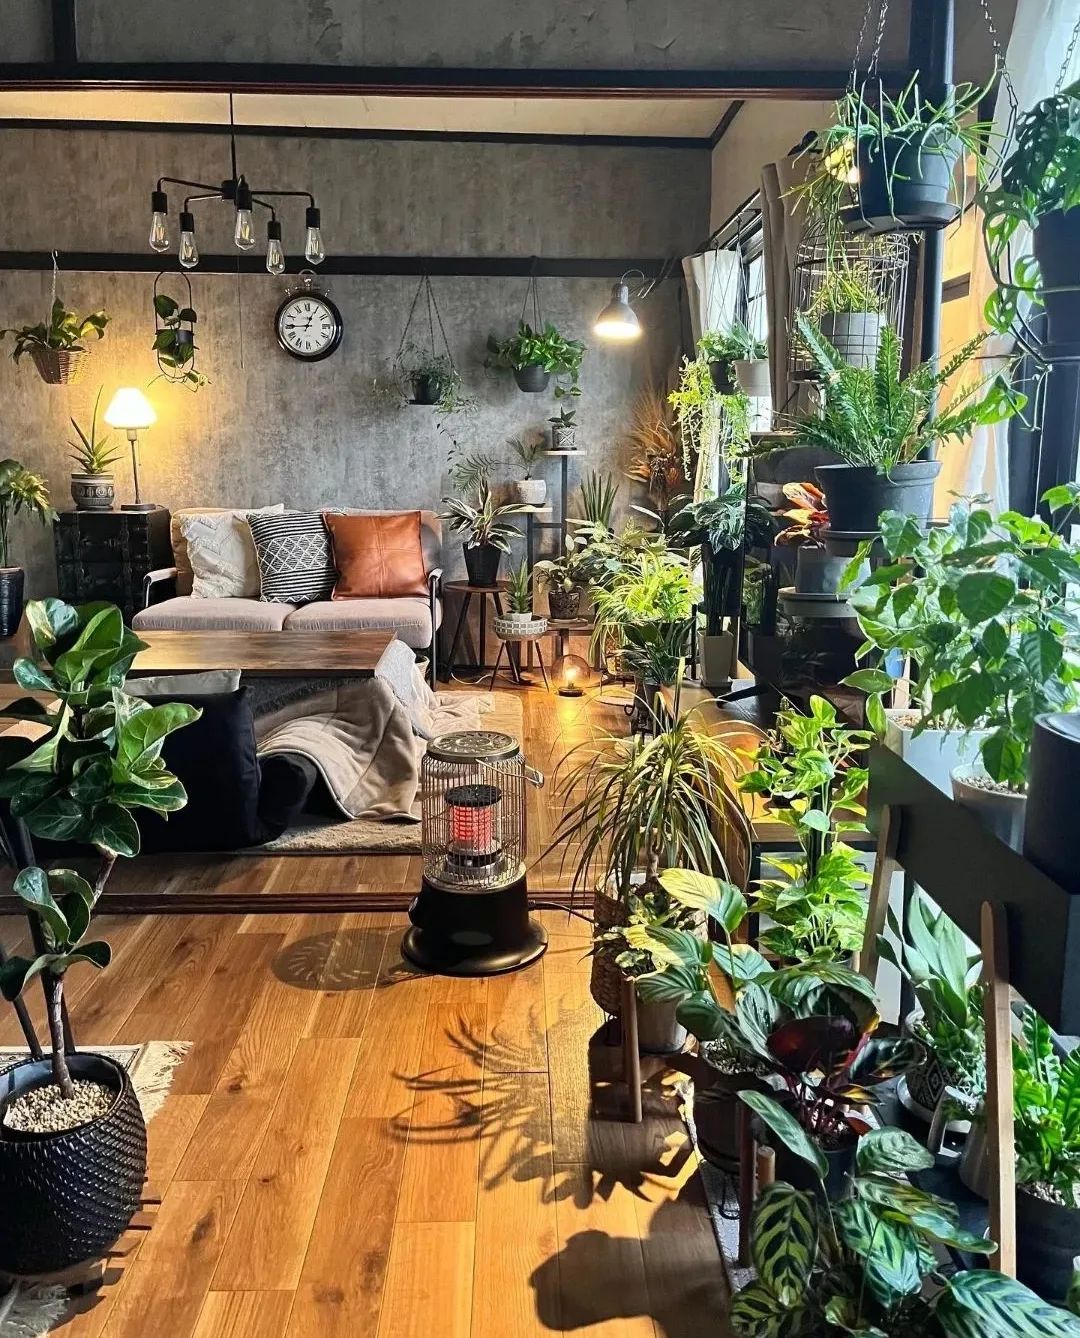 The Natural Choice: Incorporating Plant-Heavy Decor Into Your Home’s Look